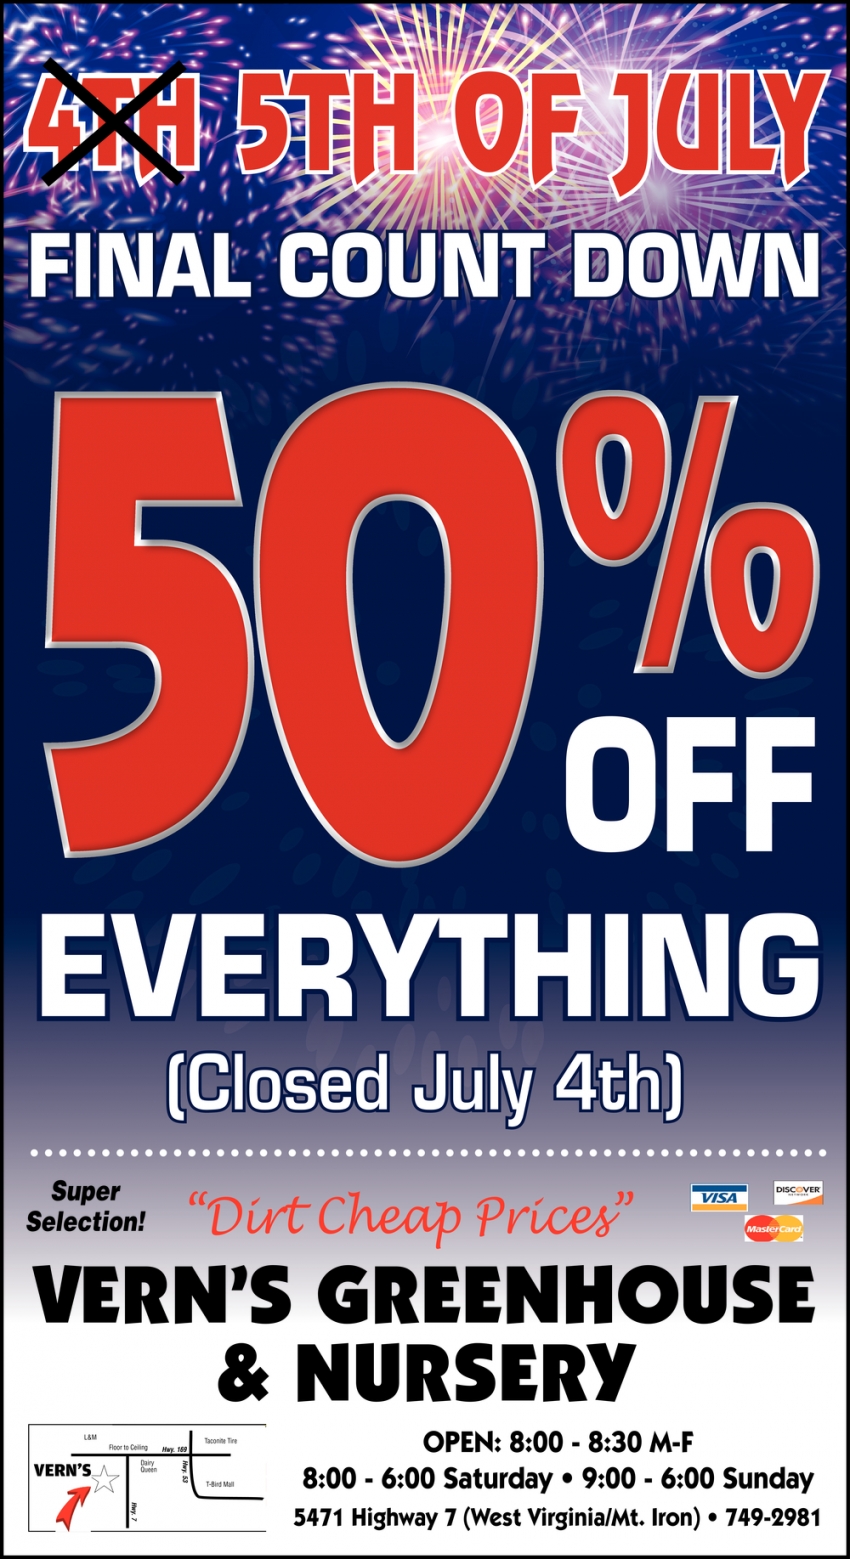 4th 5th Of July Final Count Down 50% OFF Everything